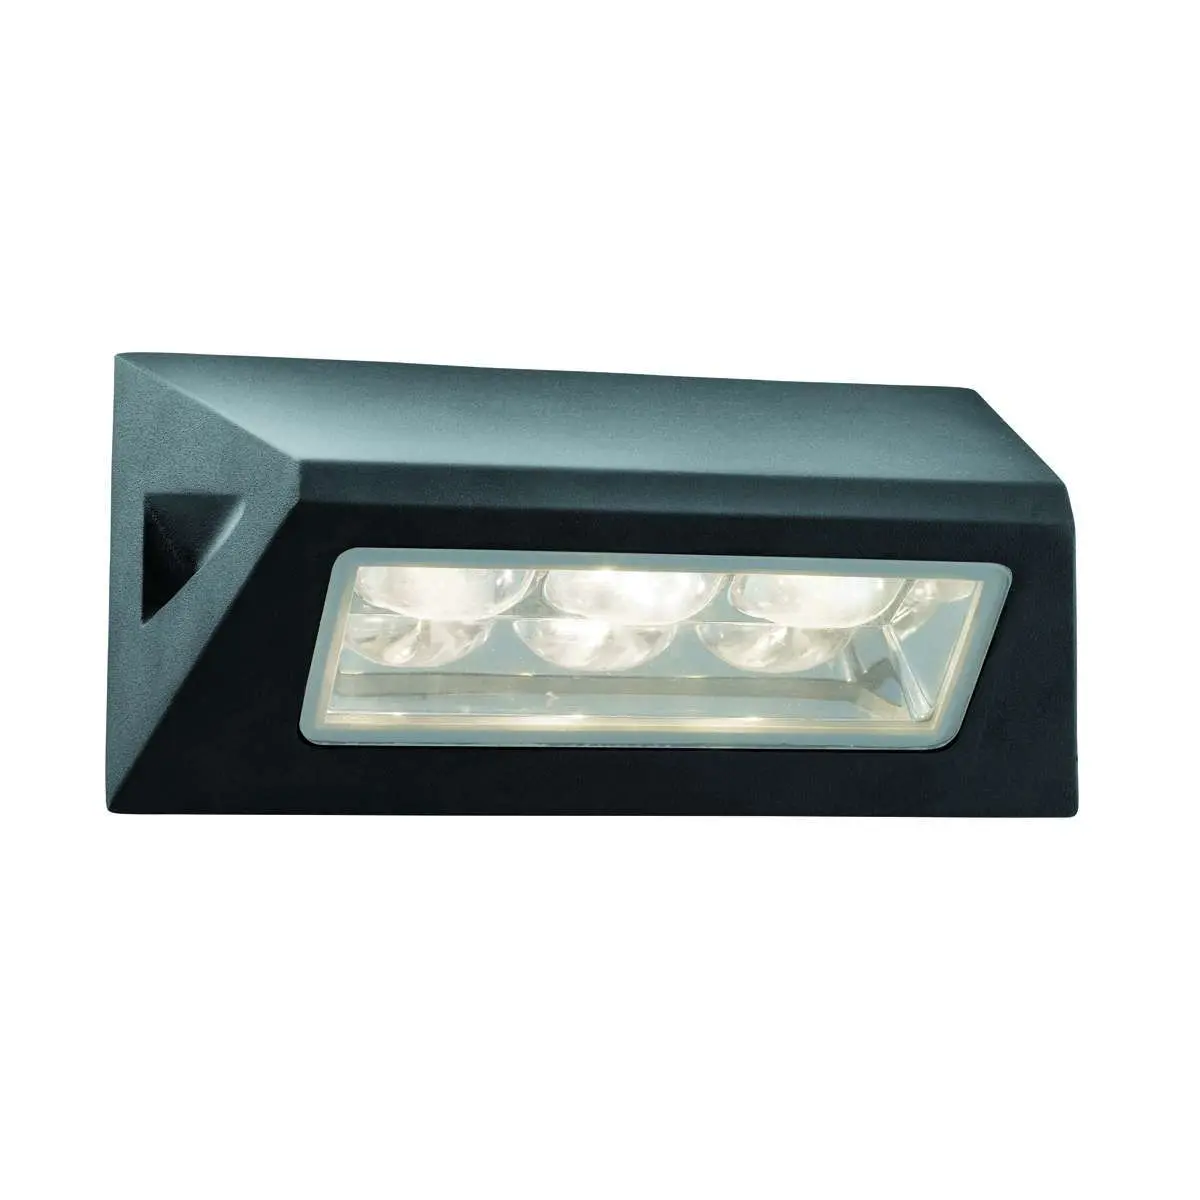 Black Ip44 3Led Outdoor Oblong Wall Light With White Led